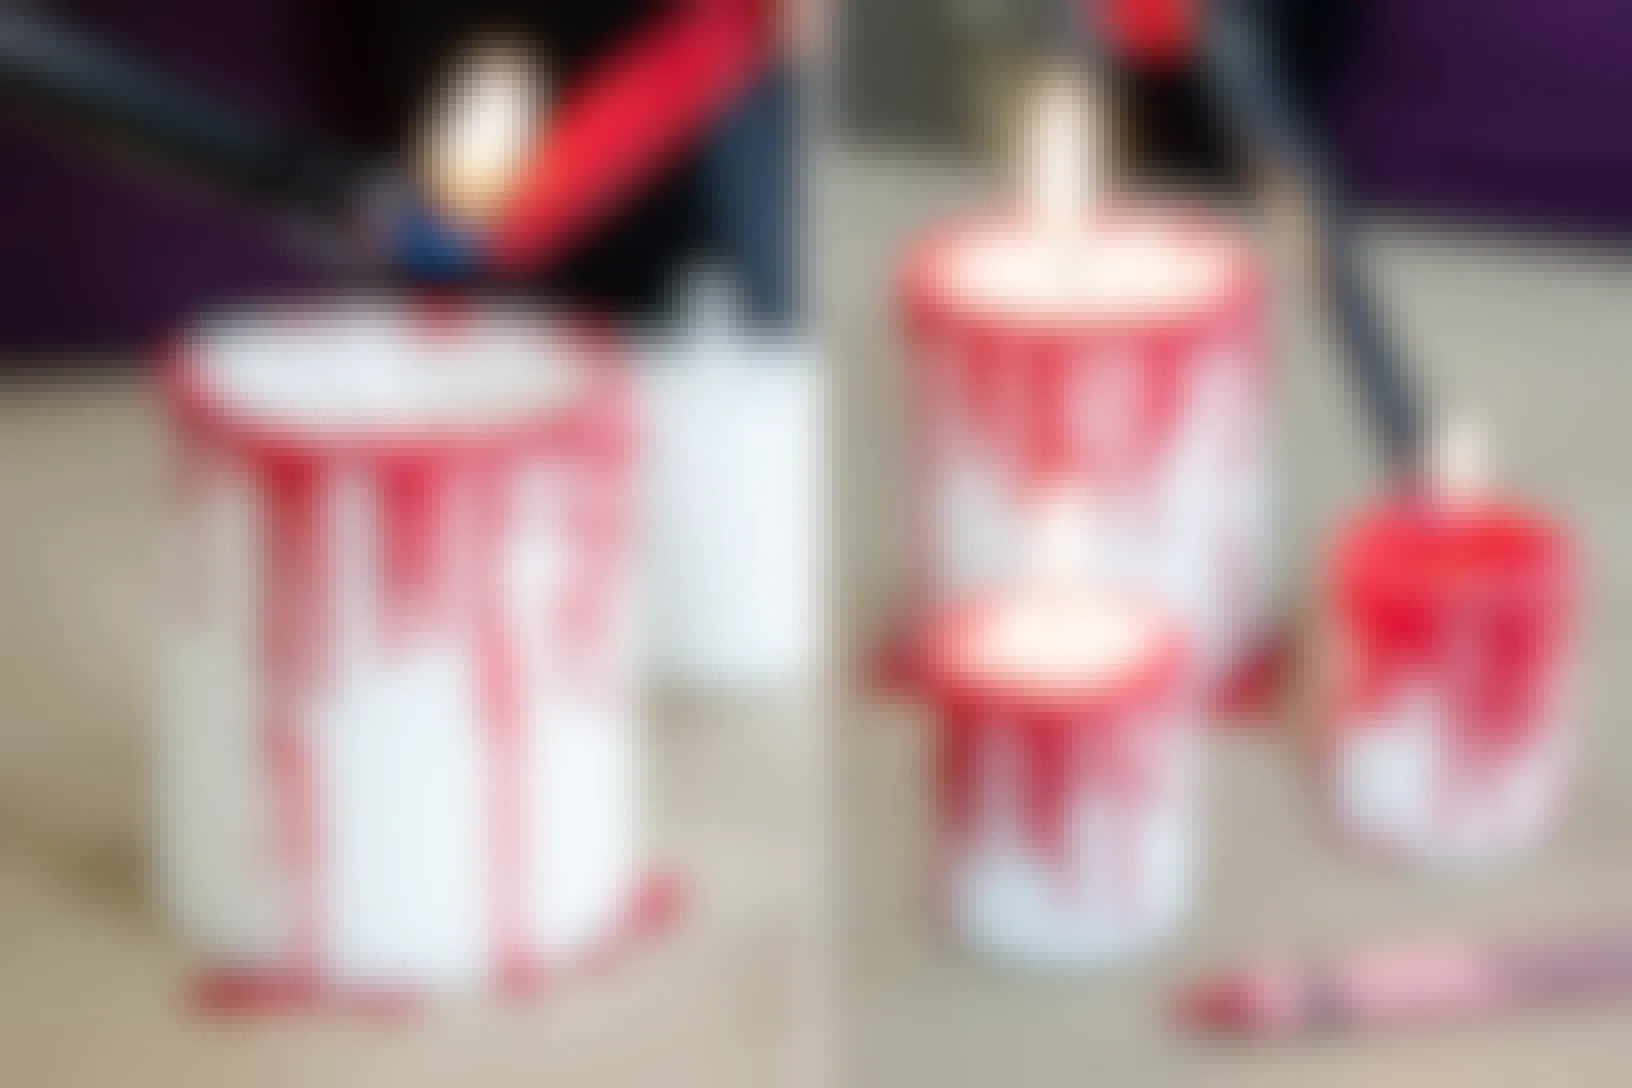 Two photos side-by-side; A person using a lighter to melt a red crayon all over the outside of a red white candle making drips down the side that look like blood. A person using a lighter to light one of the candles with crayon melted down the sides. Two other candles are already lit.